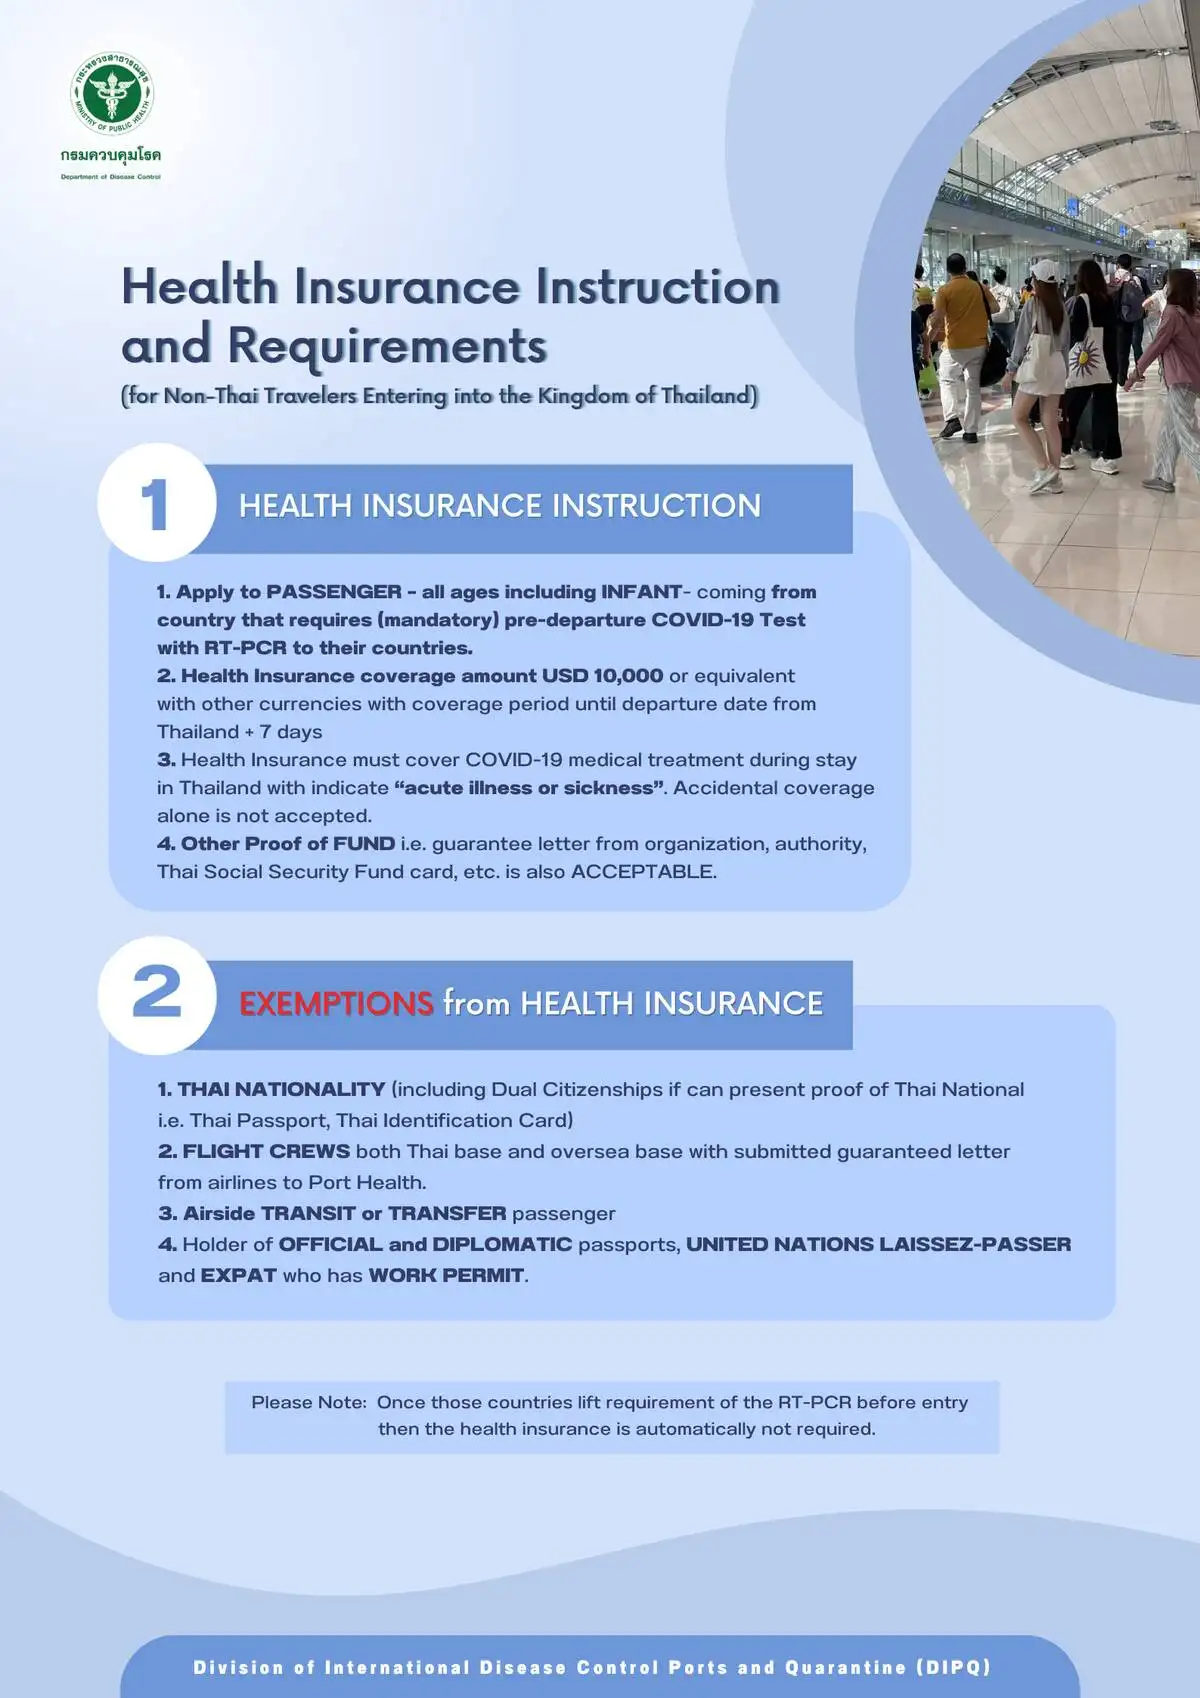 Public Health Measures for Foreign Travelers Entering Thailand (10 Jan 2023) HealthServ